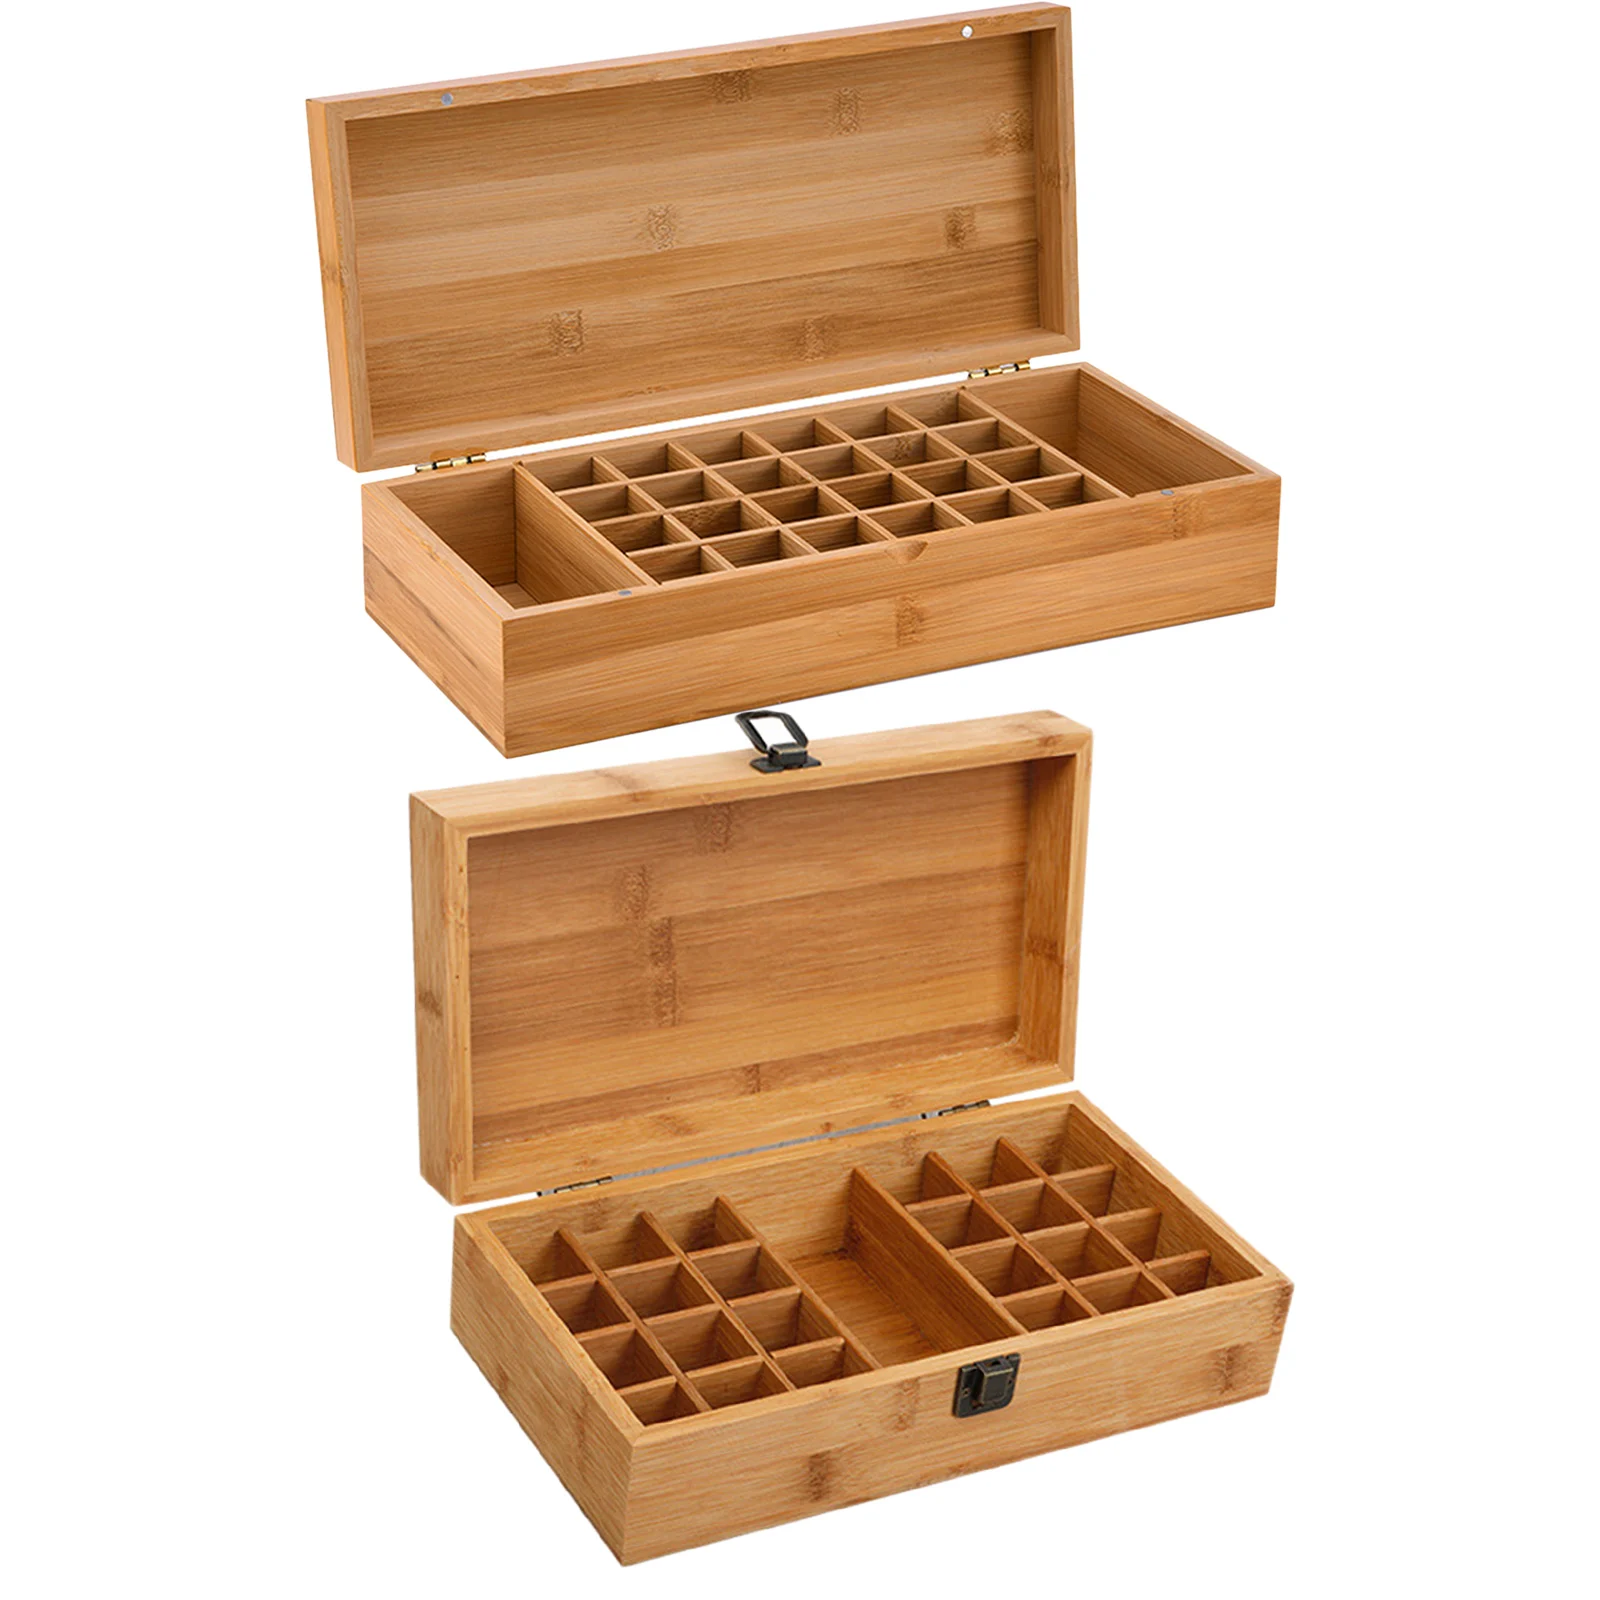 24 slots Essential Oil Wooden Storage Box Case Container Aromatherapy